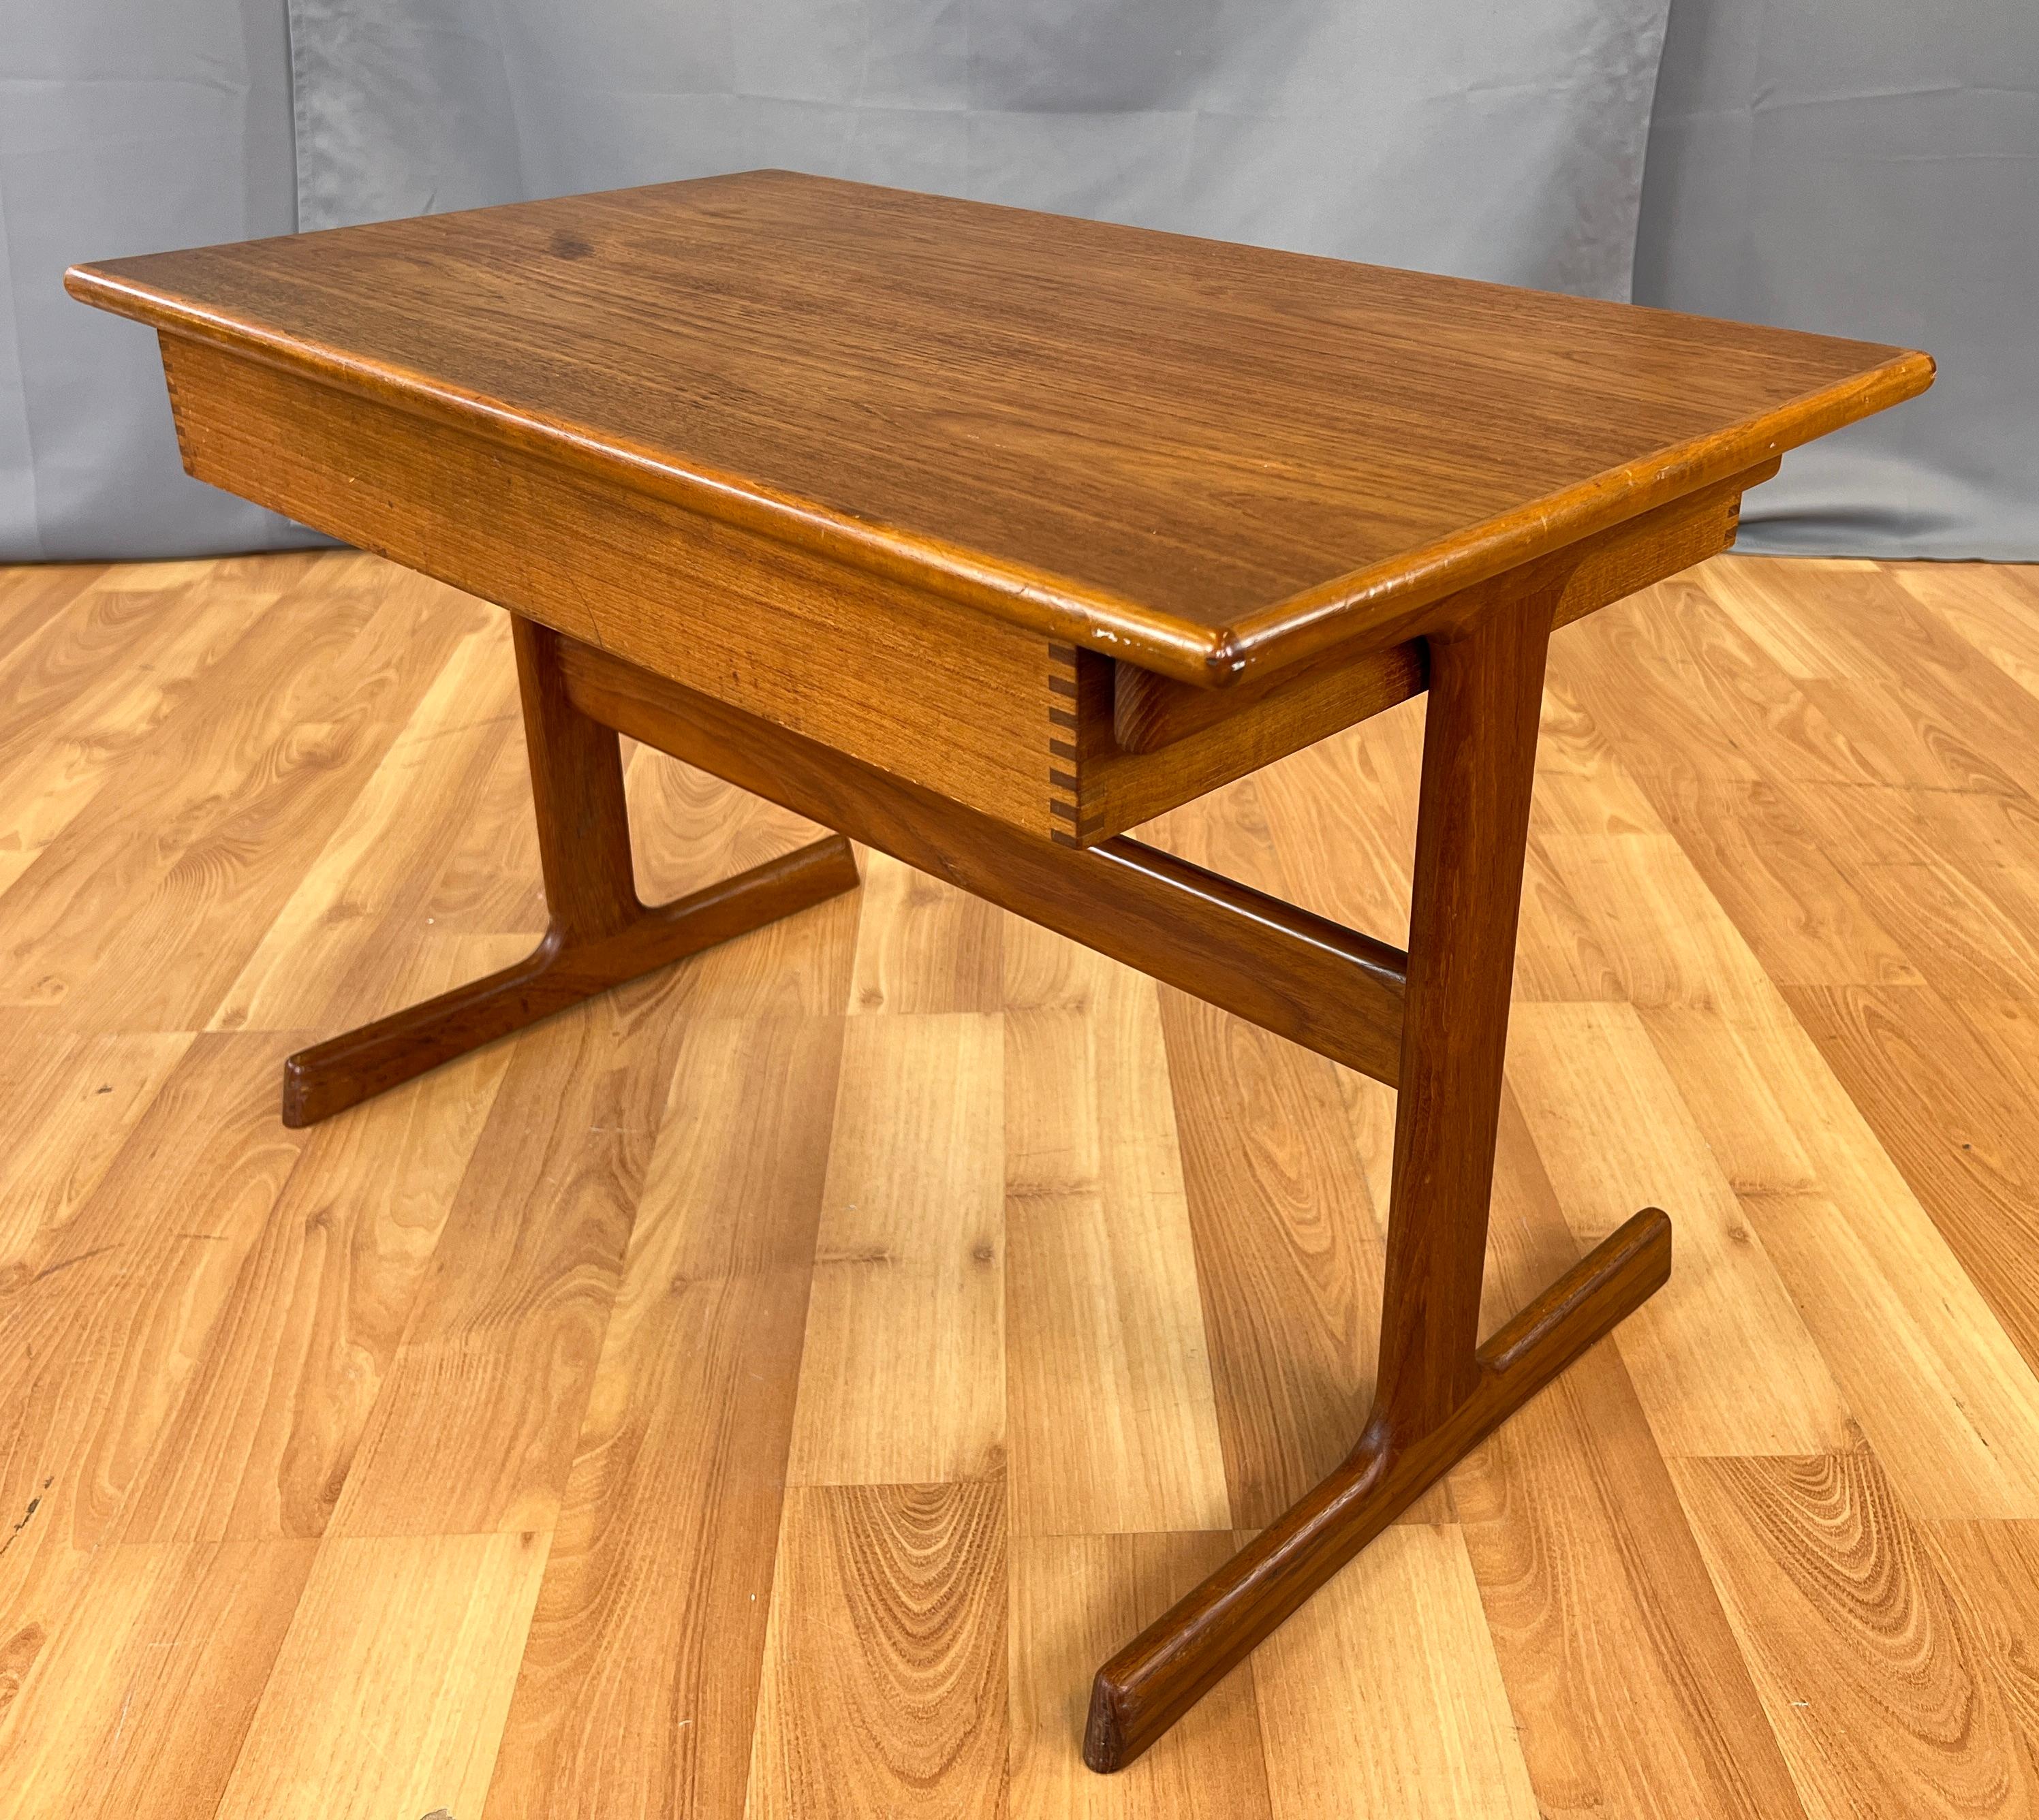 A Kai Kristensen designed Teak side table or night stand, with a drawer. Made in Denmark.
Pair of solid teak leg, in between a rectangular teak table top and underneath a small drawer.
Nice dovetail joints of the drawer, nice lines over all